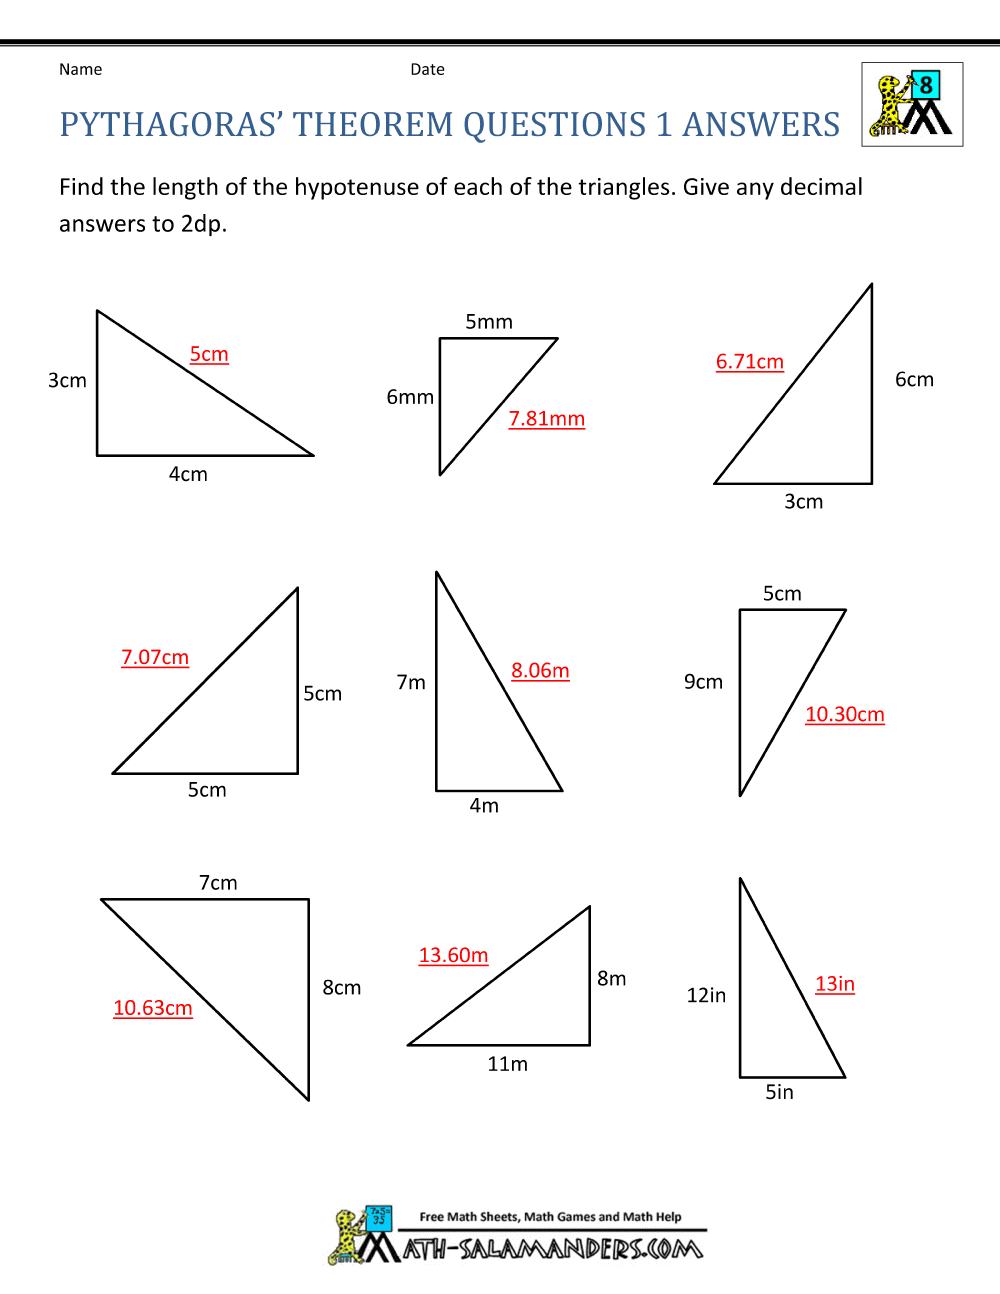 Pythagoras Theorem Questions In Pythagorean Theorem Worksheet Answers